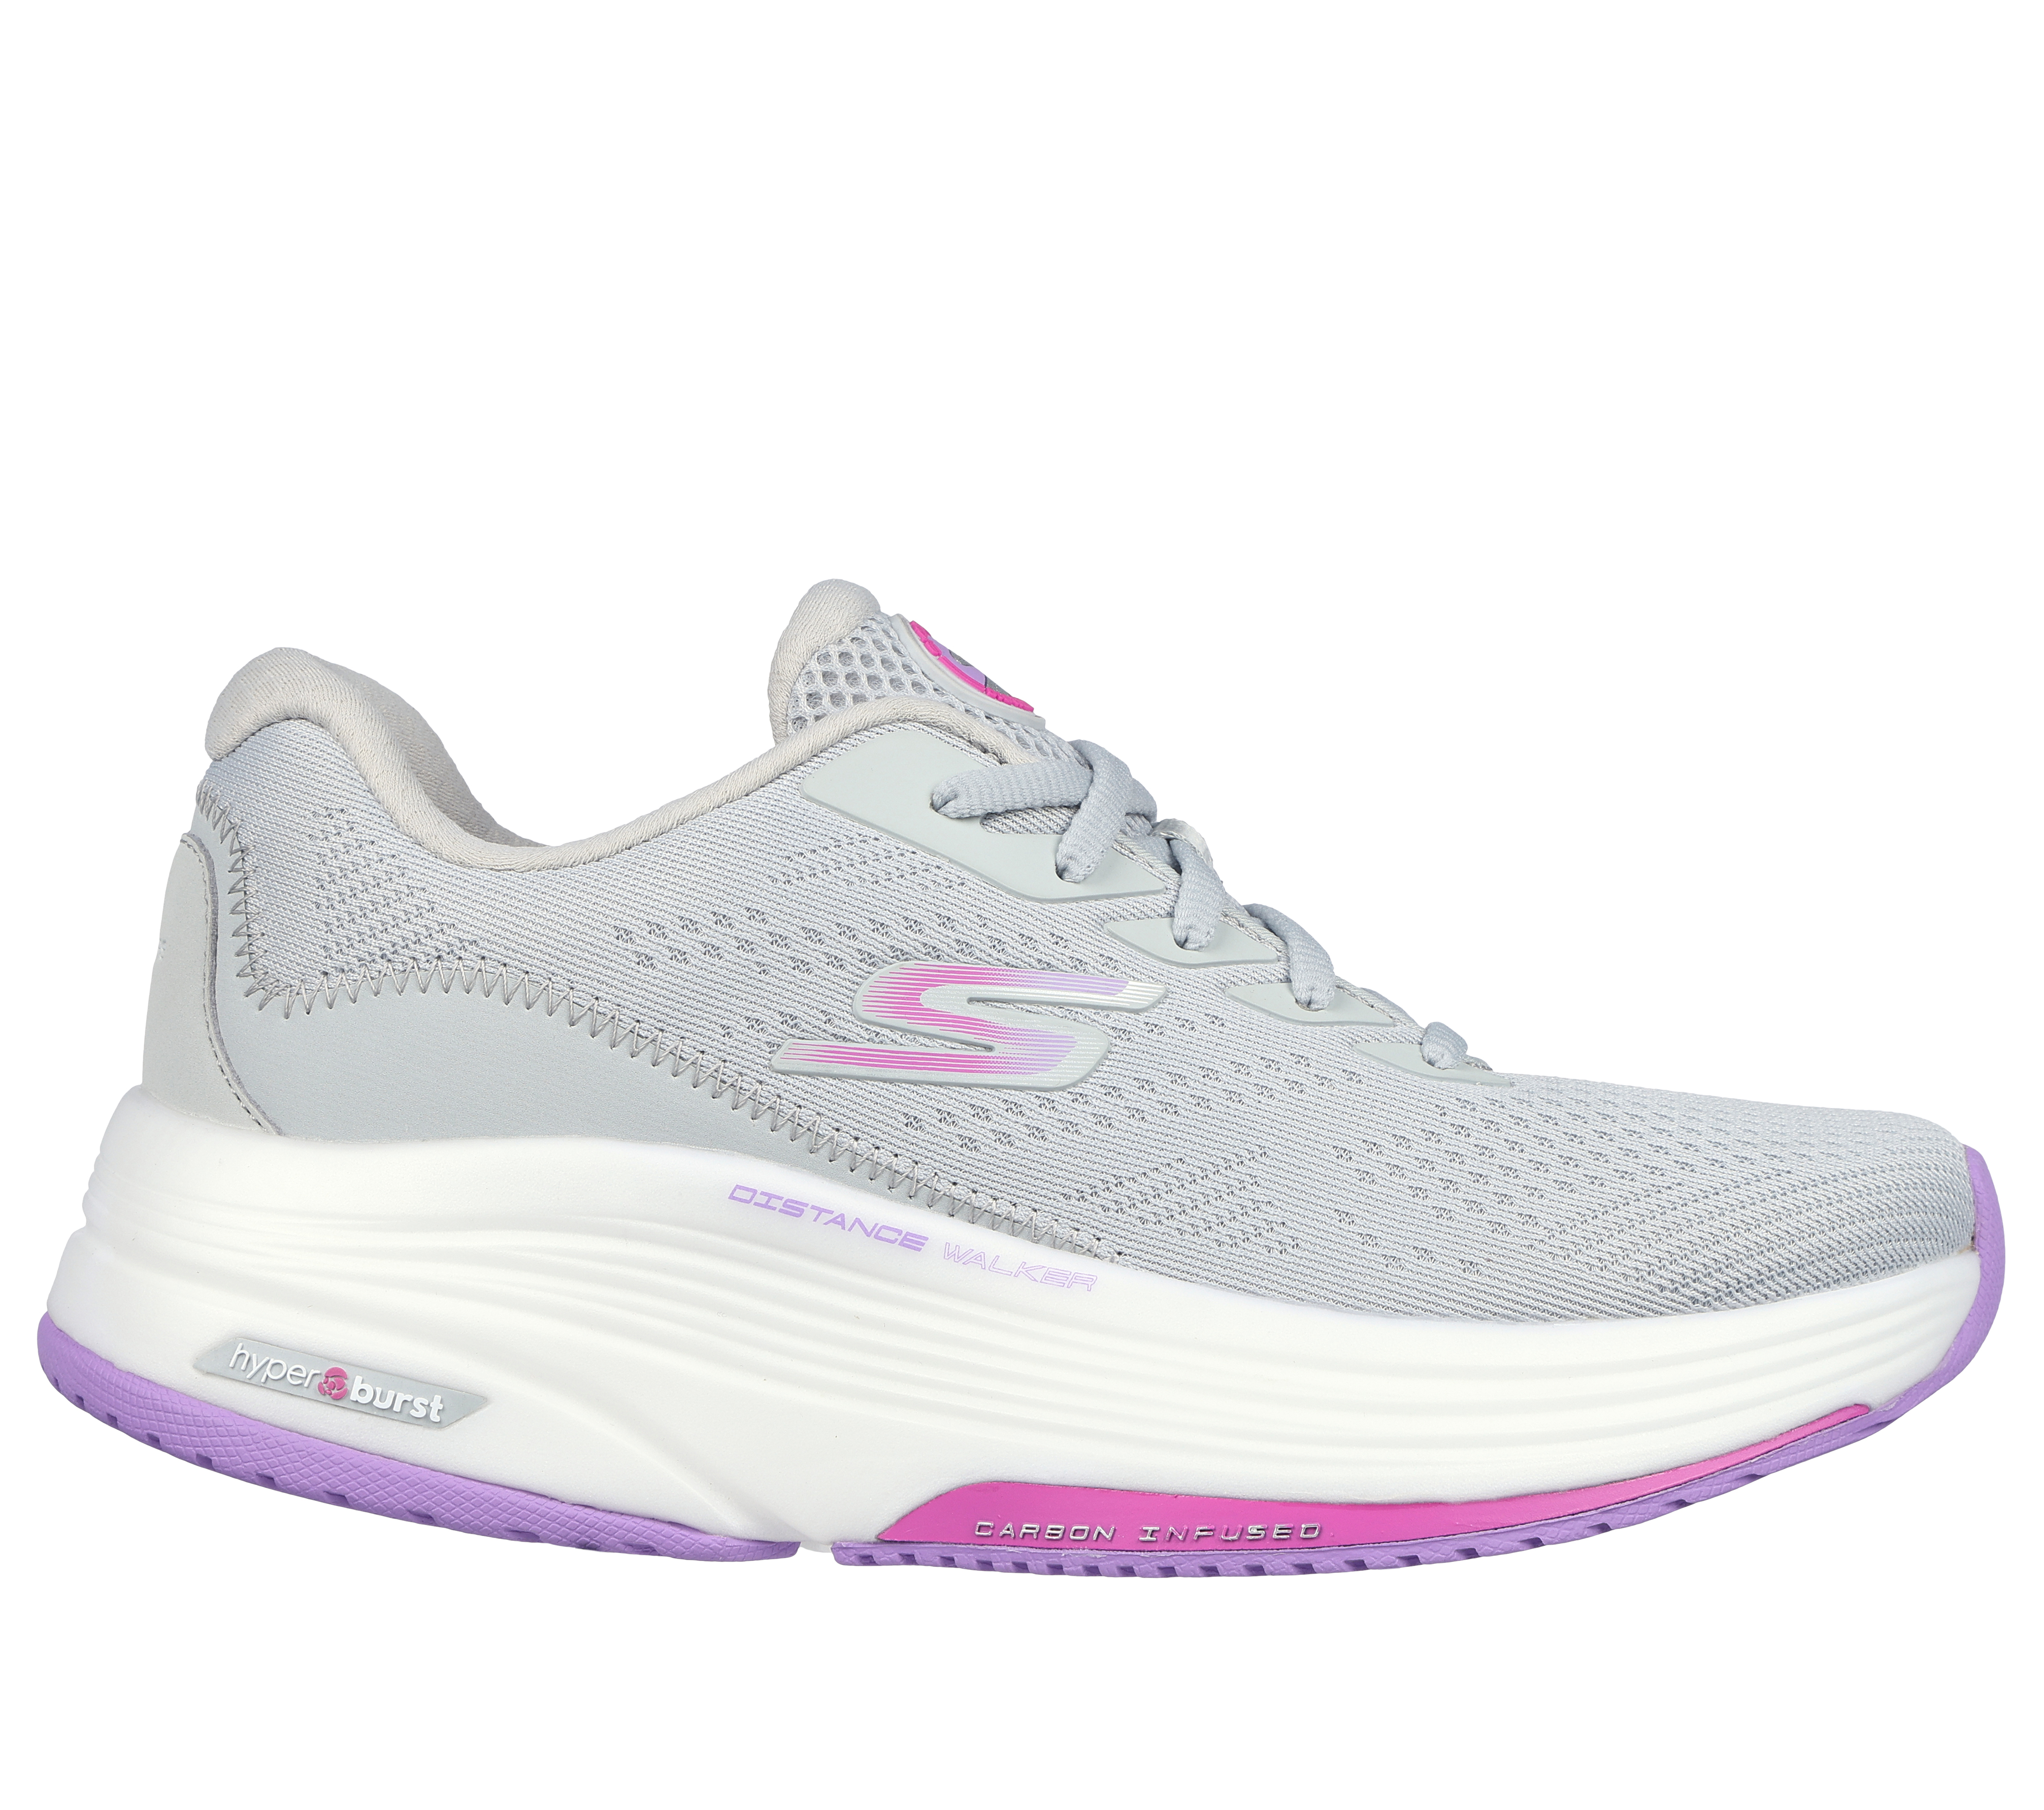 Are Skechers Good for Walking Long Distance?